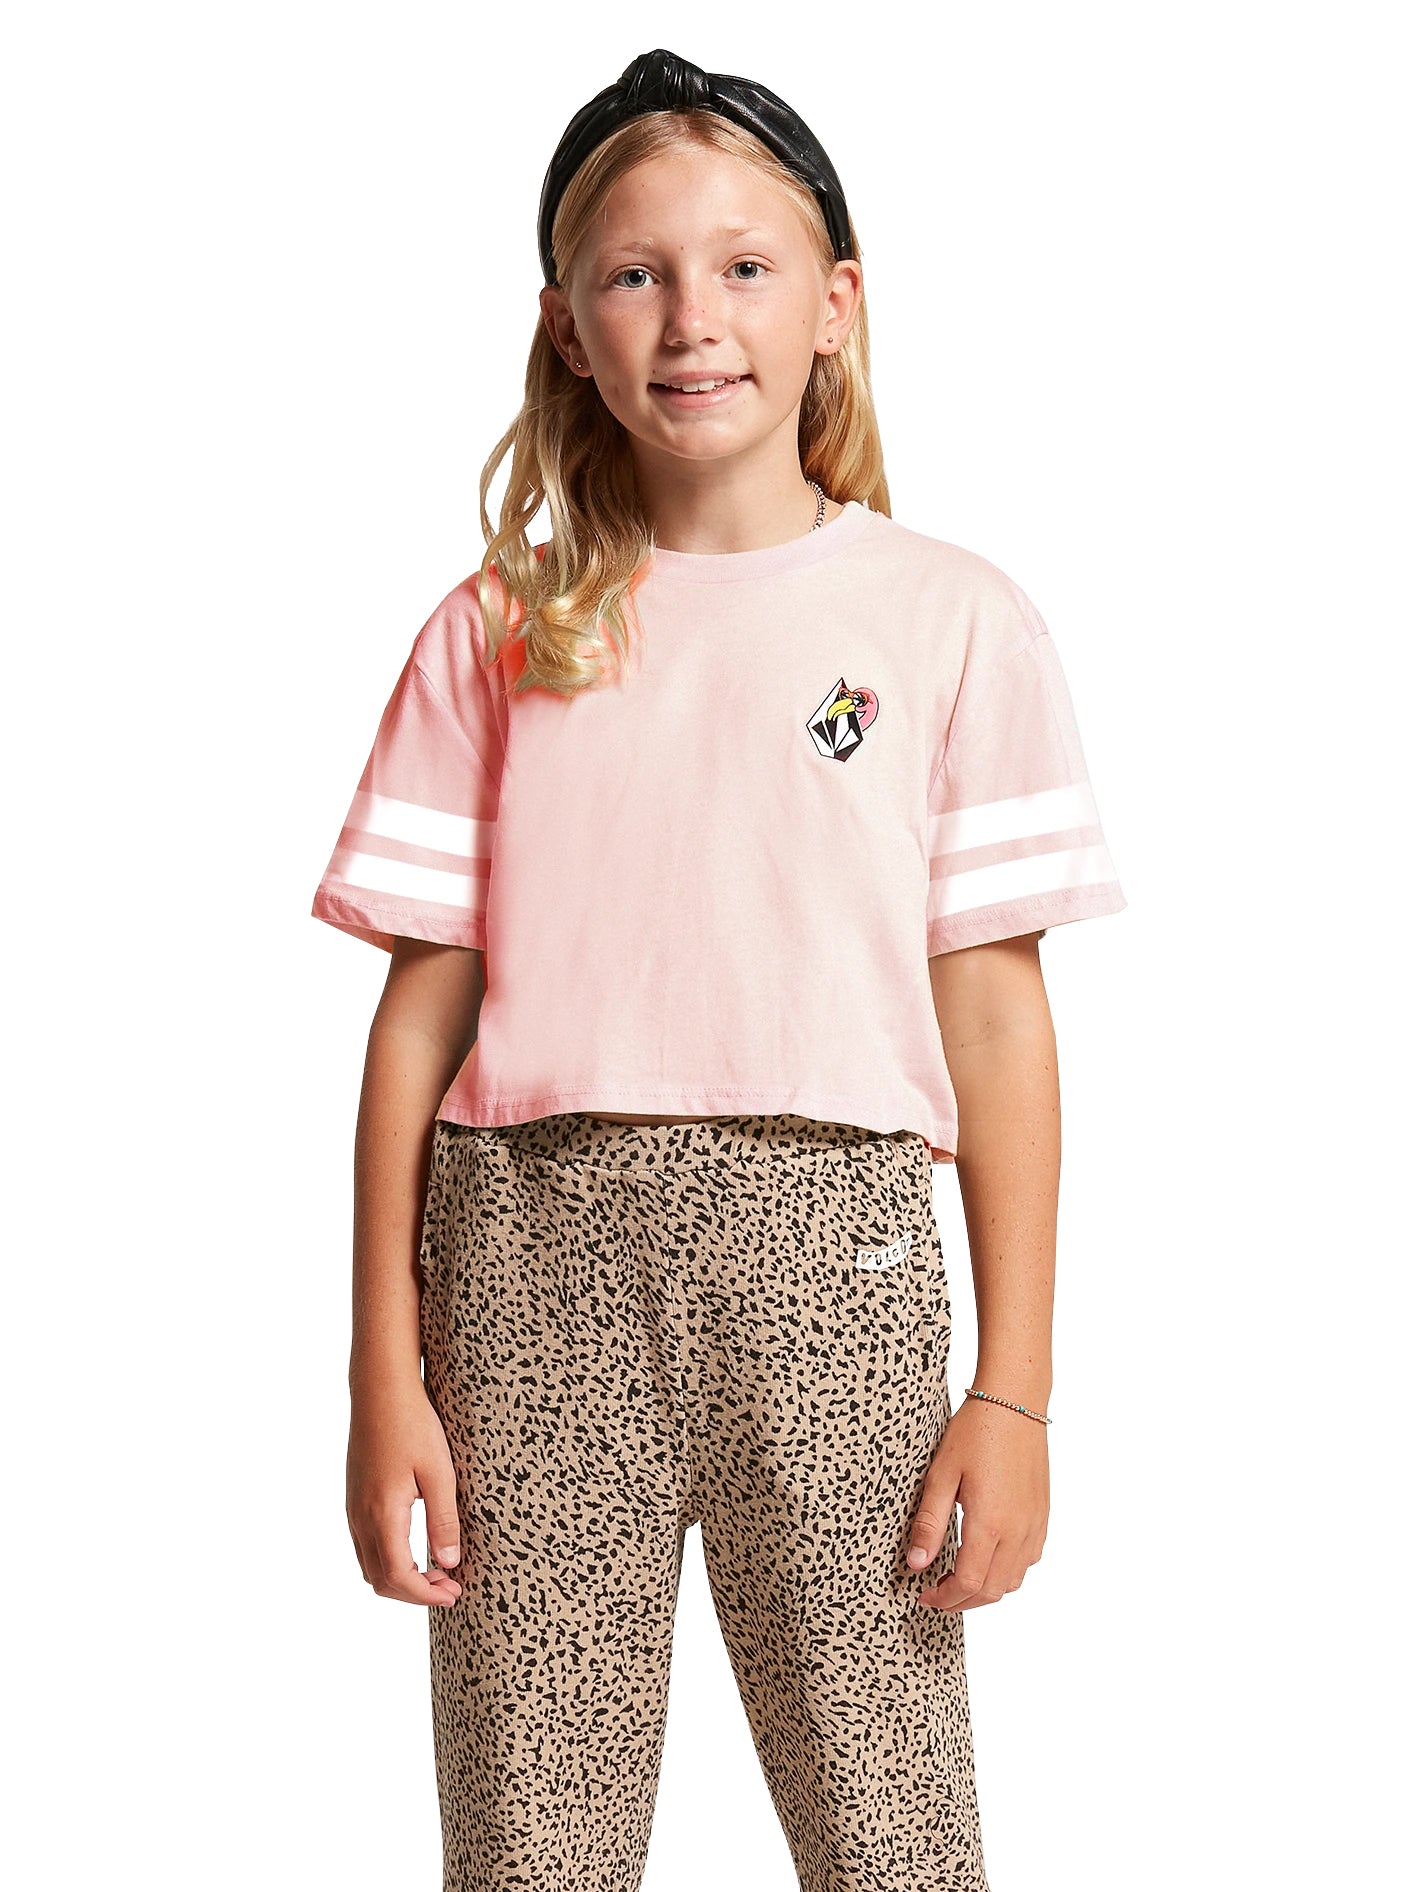 Volcom Truly Stoked Girls Tee  PNK L